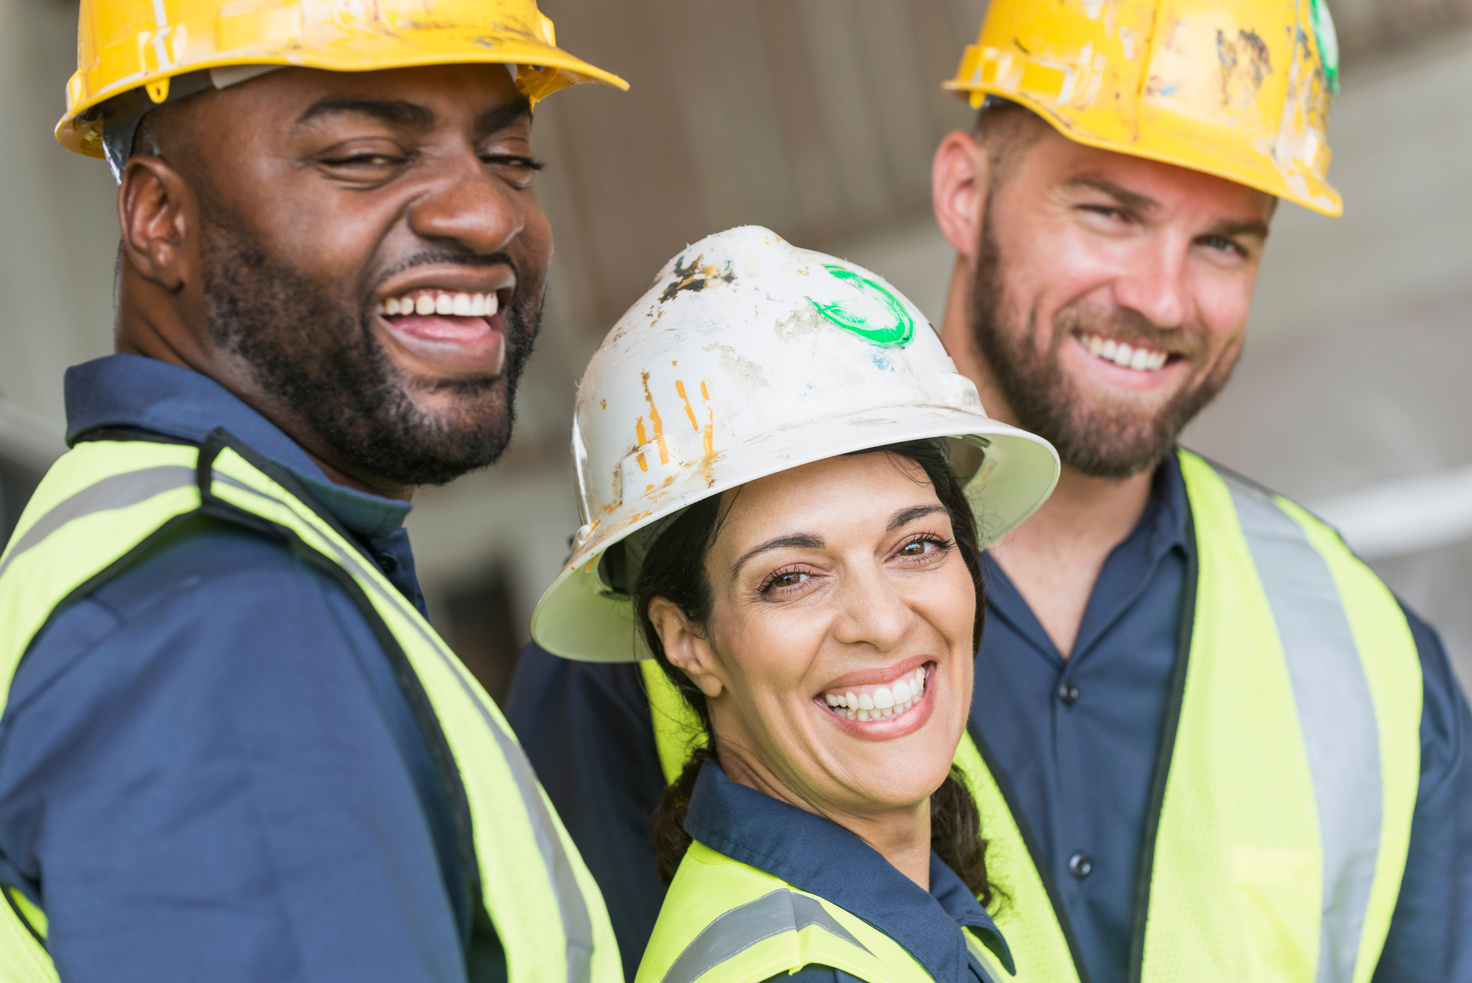 three construction workers smiling for the camera